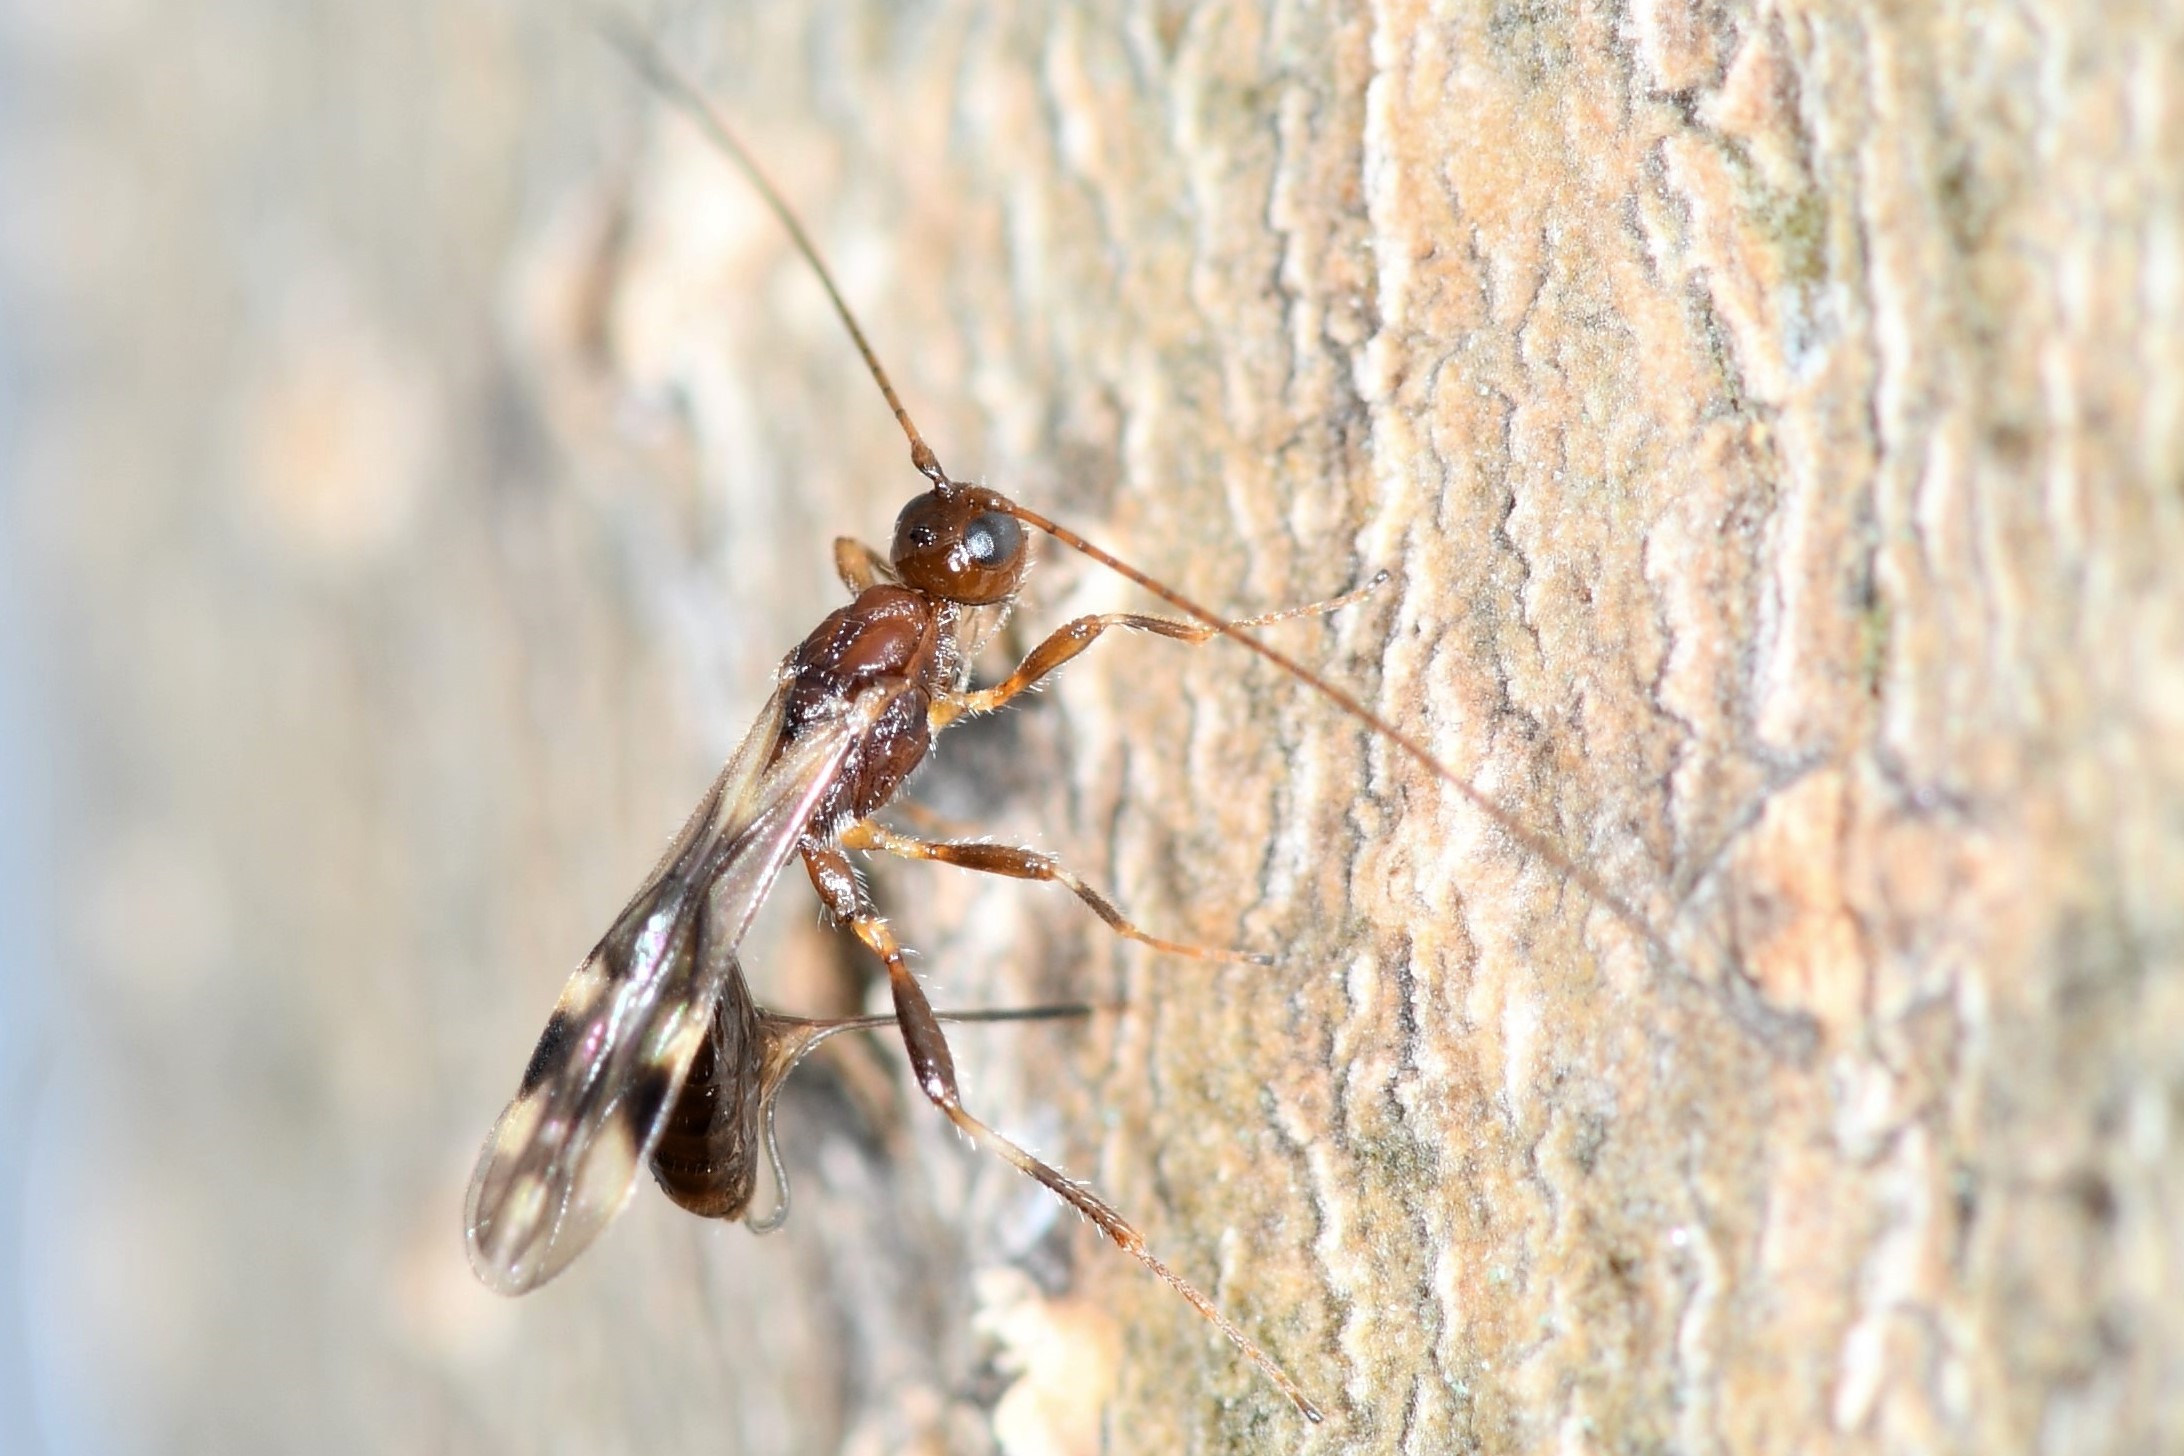 To help stop voracious tree-killing beetles, send in the Russian wasps